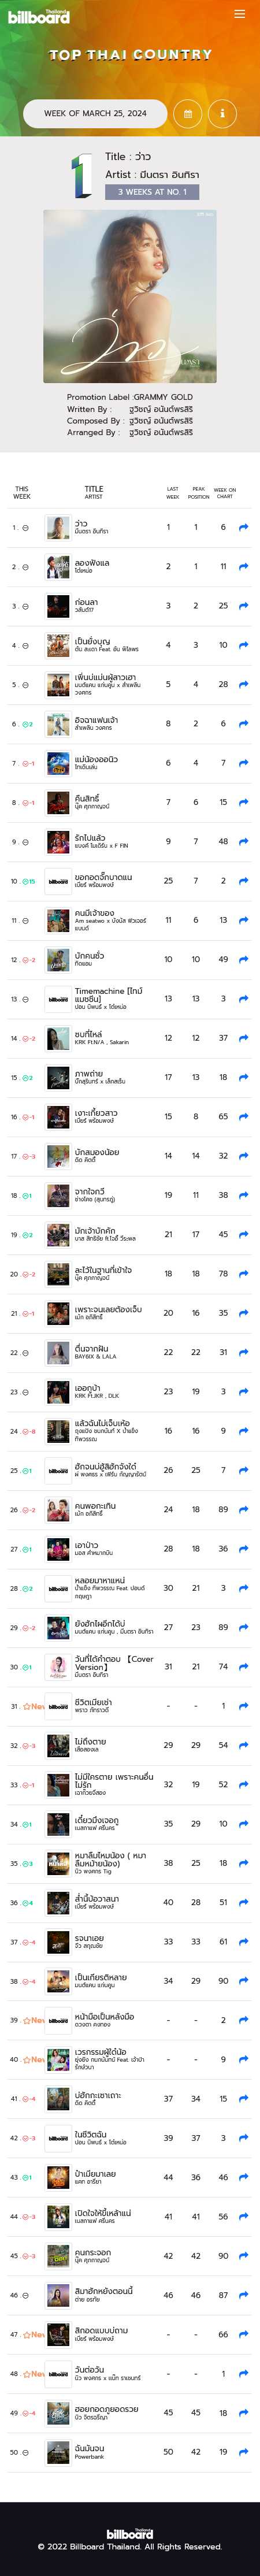 BillboardTH • TOP 50 THAI COUNTRY •  MARCH 25, 2024 [320 kbps]